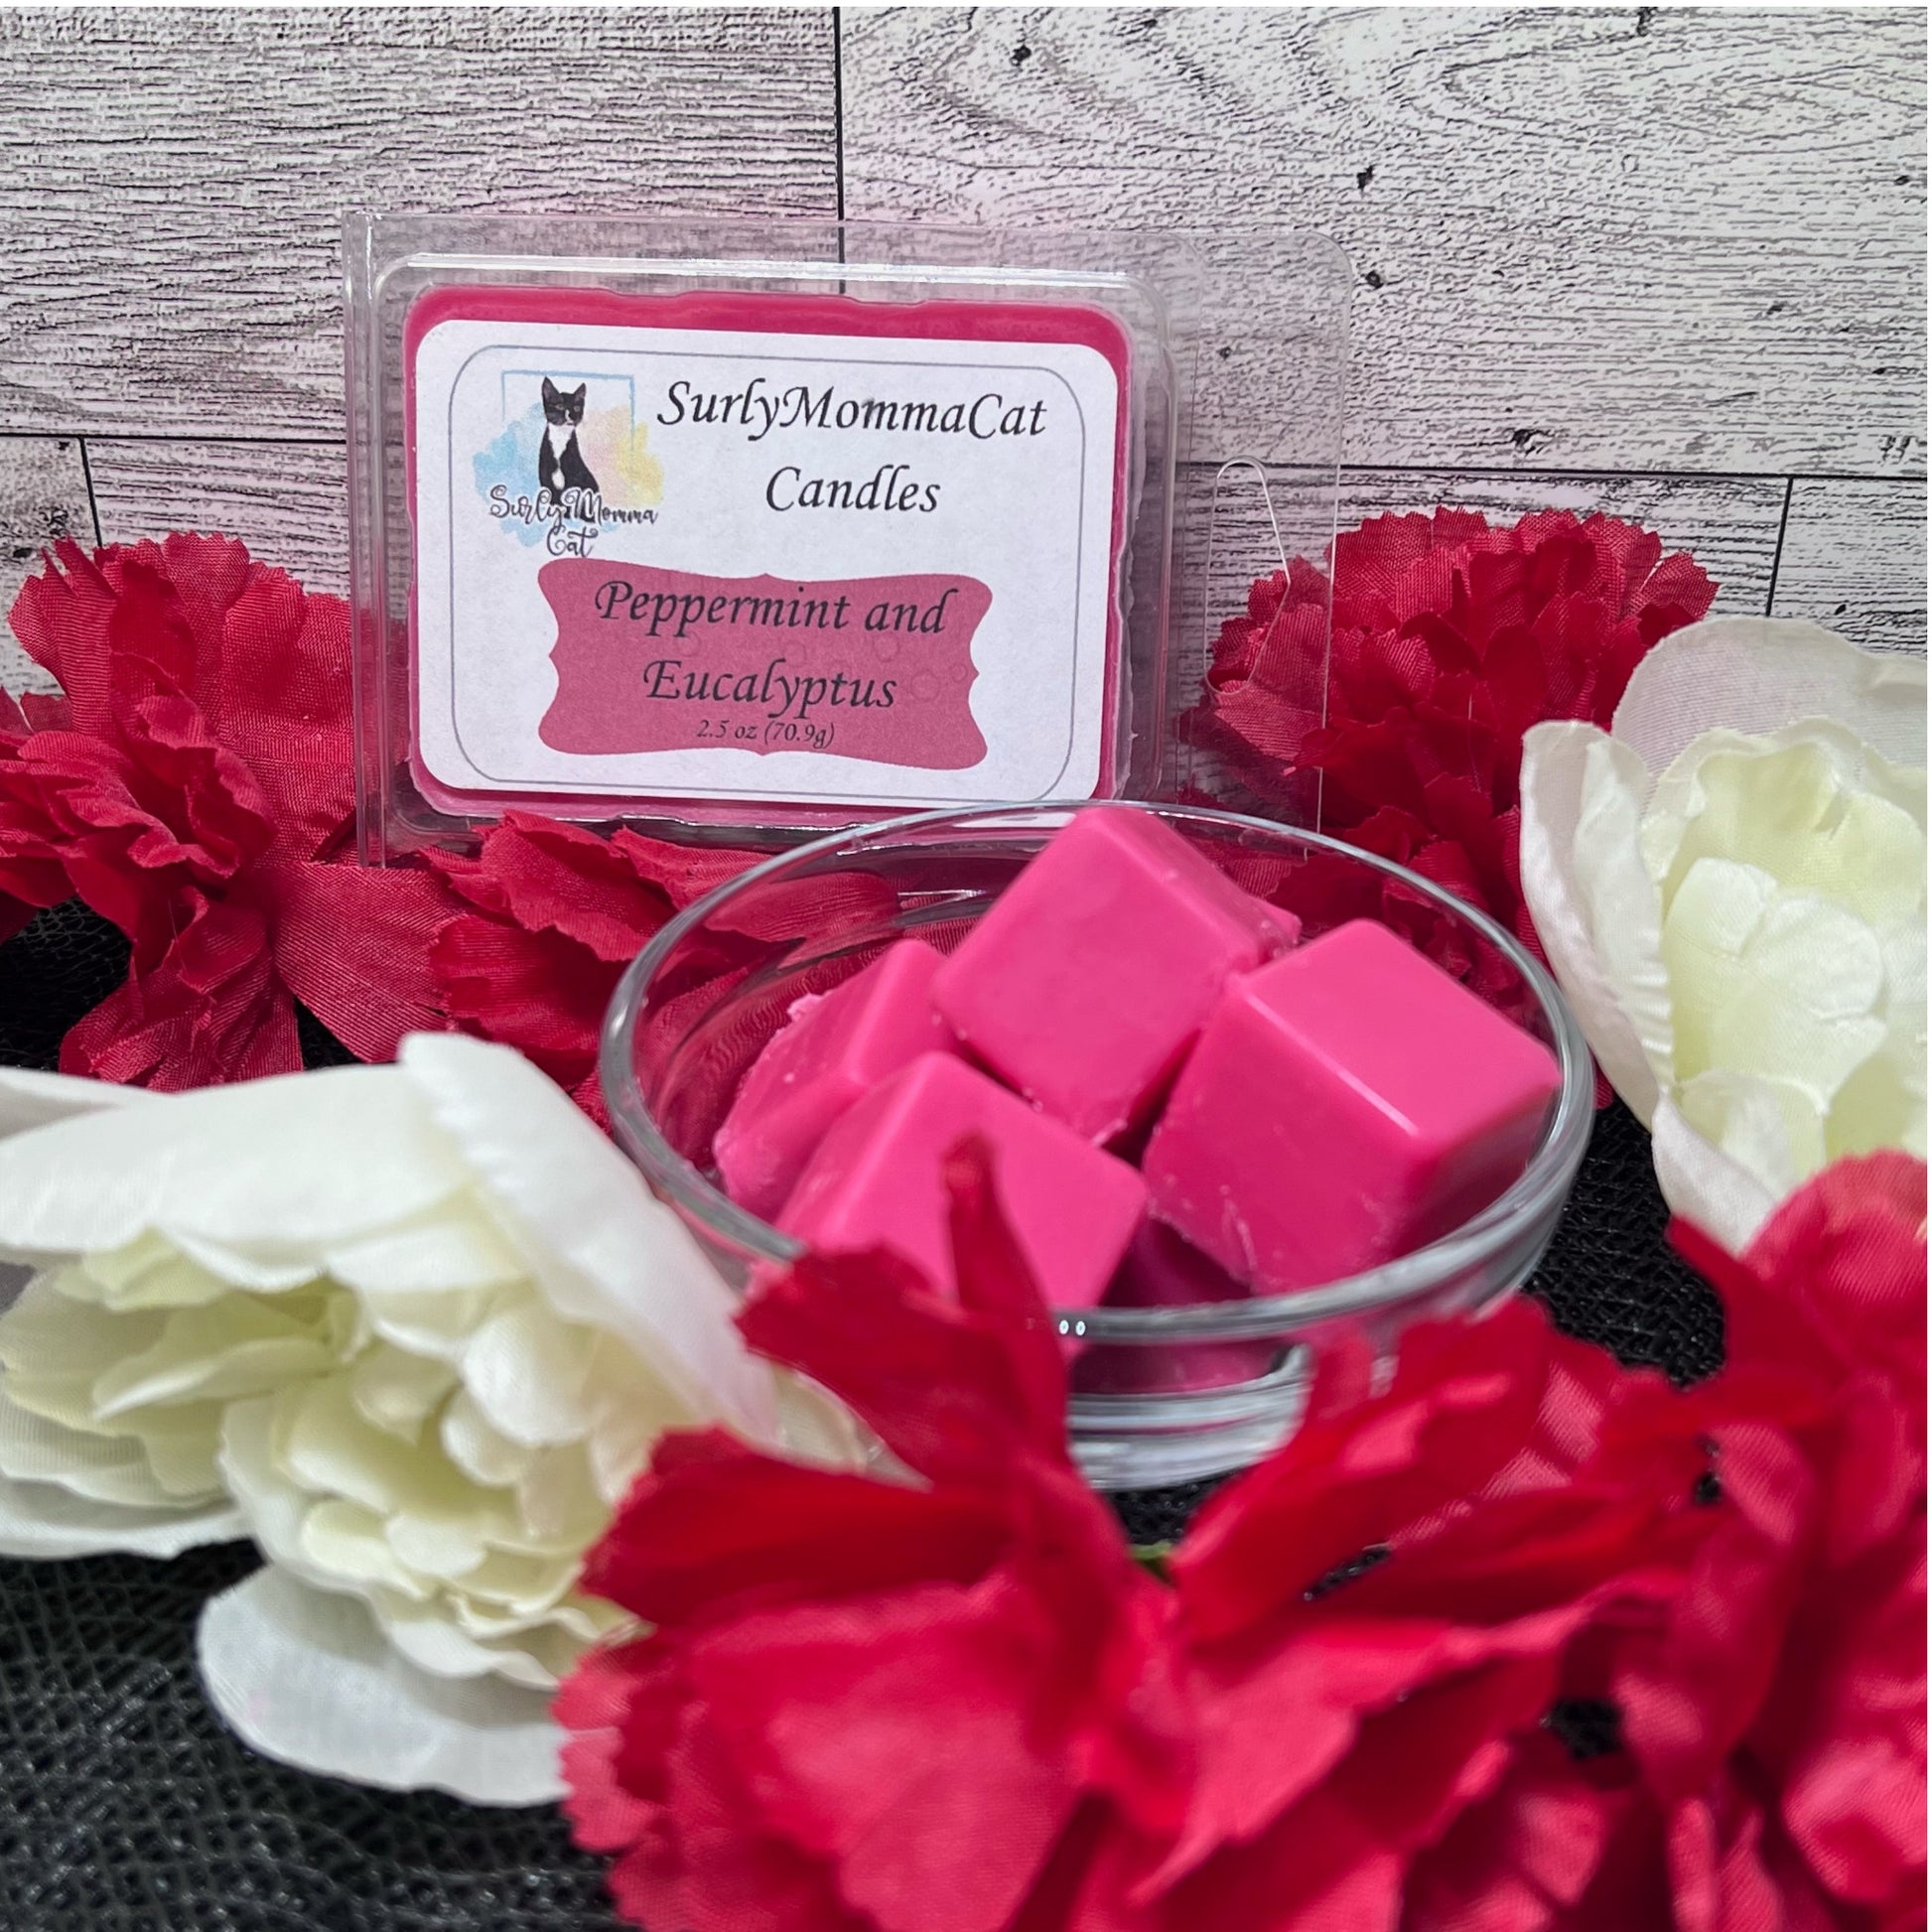 Peppermint and Eucalyptus Candles and Wax Melts – SurlyMommaCat Candles